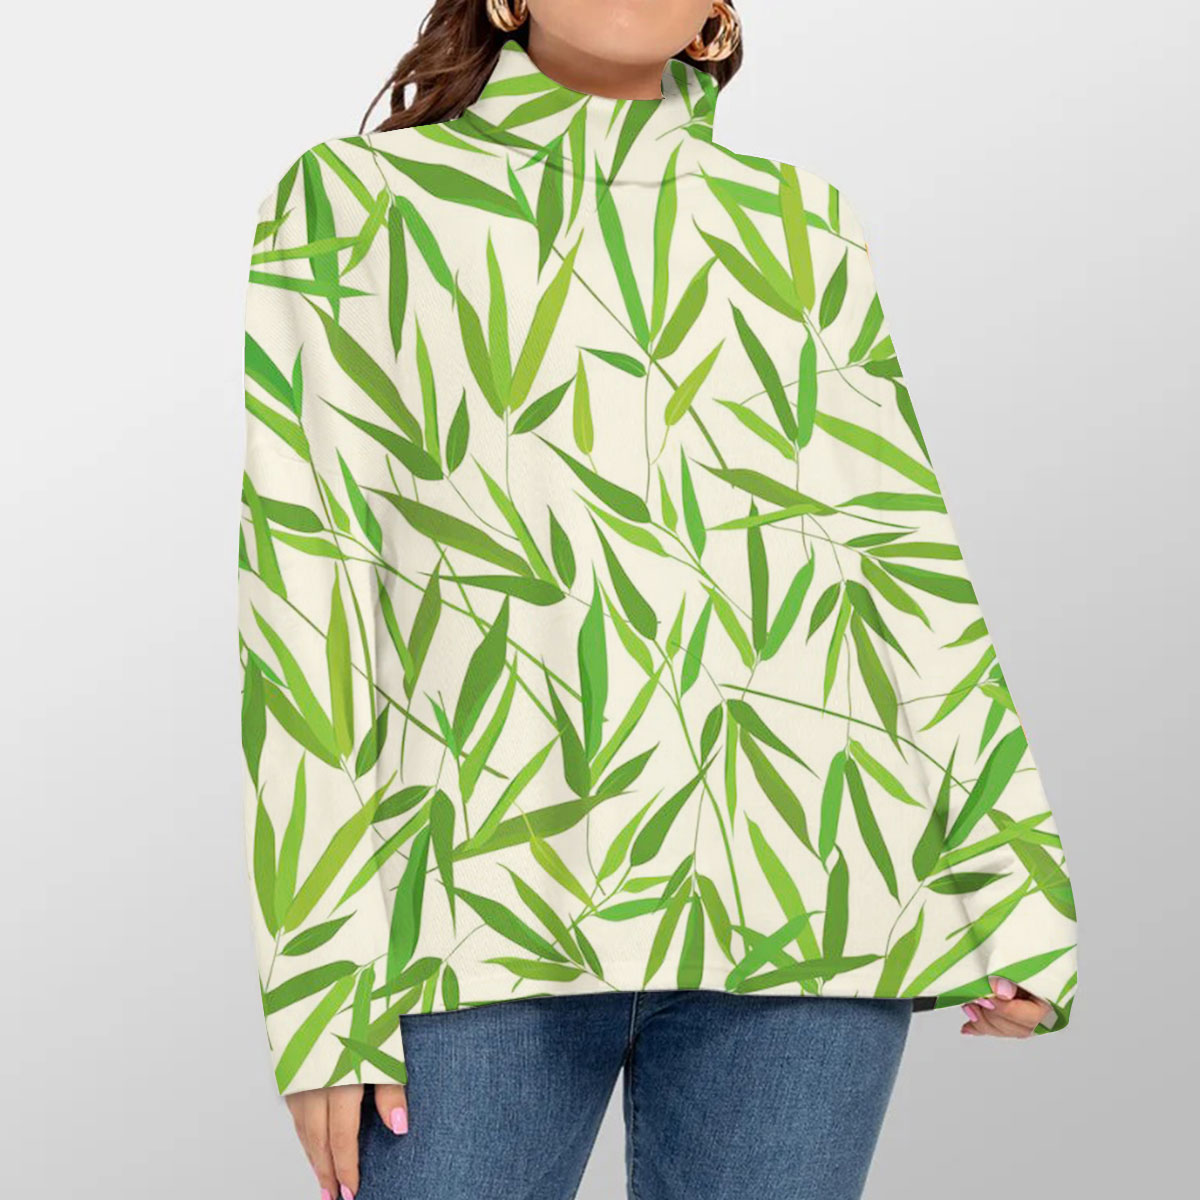 Floral Bamboo Leaves Turtleneck Sweater